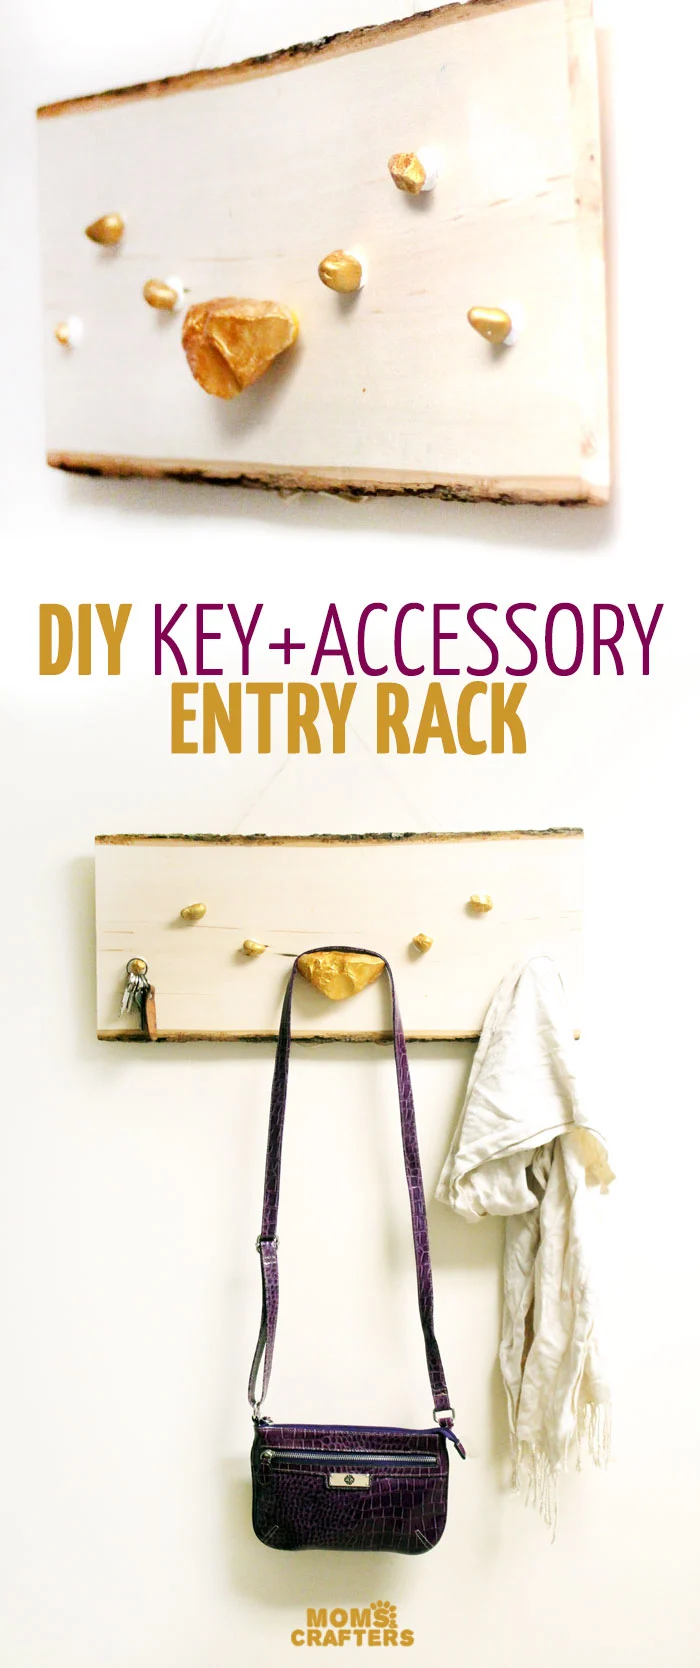 I LOVE how easy it is to make this DIY key and accessory organizer. What a great idea to declutter an entryway. IT will fit a rustic or natural home decor theme, with a touch of metallic gold too. Such a great entry organization idea - and it uses rocks, which are stuck WITHOUT TOOLS - how cool?!